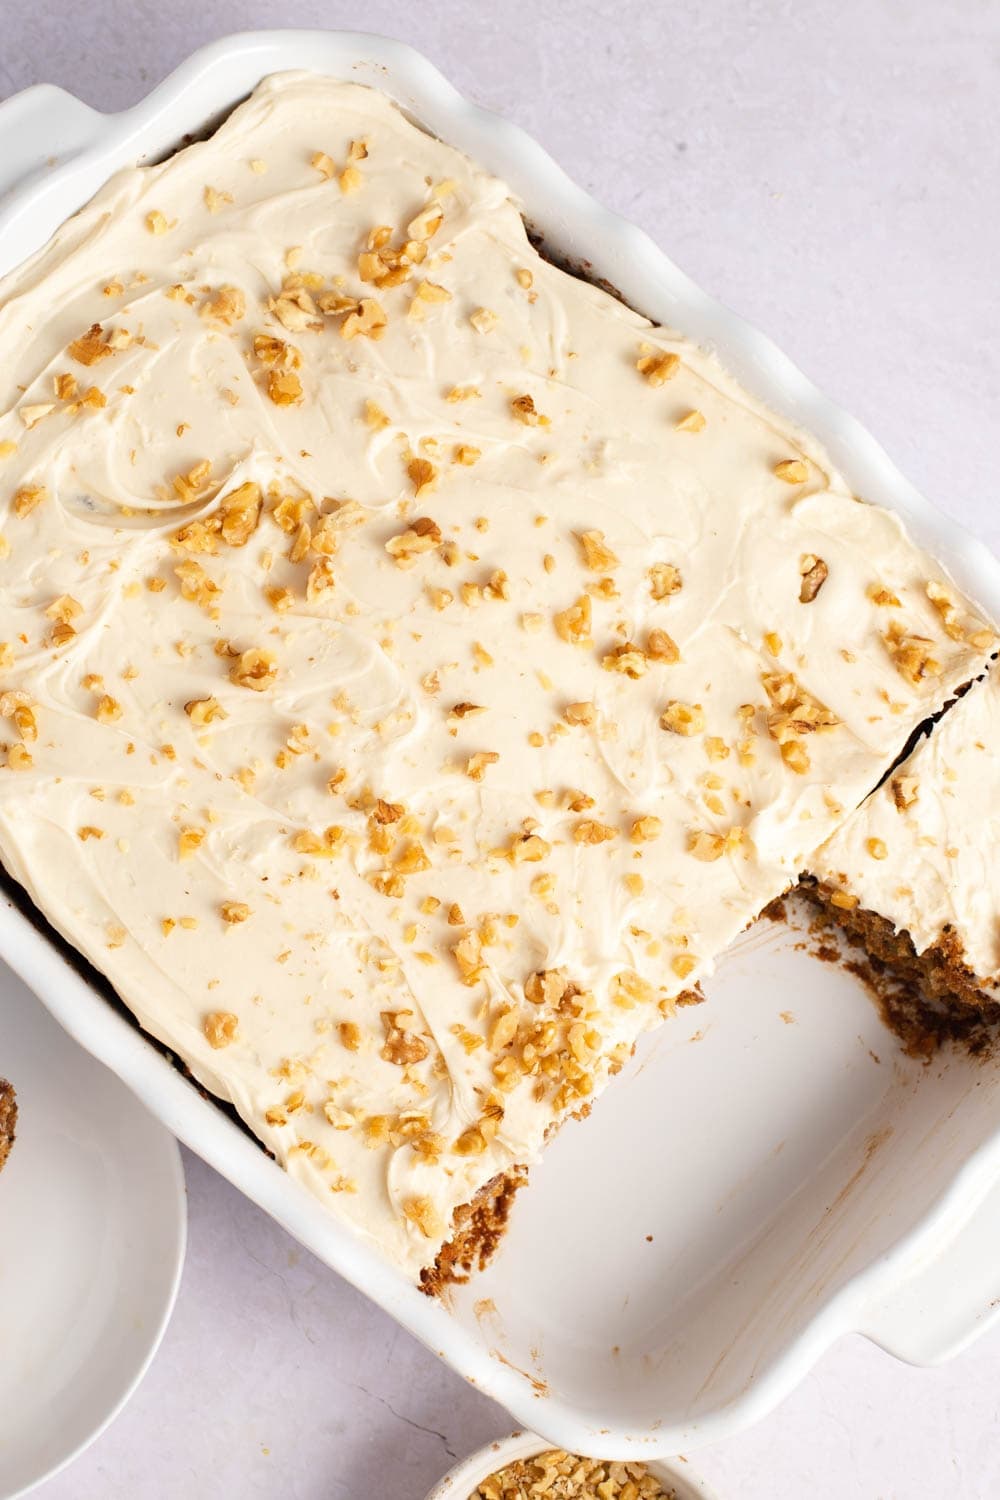 Moist Carrot Cake with Coconut and Walnuts. Overhead view in a white baking dish.